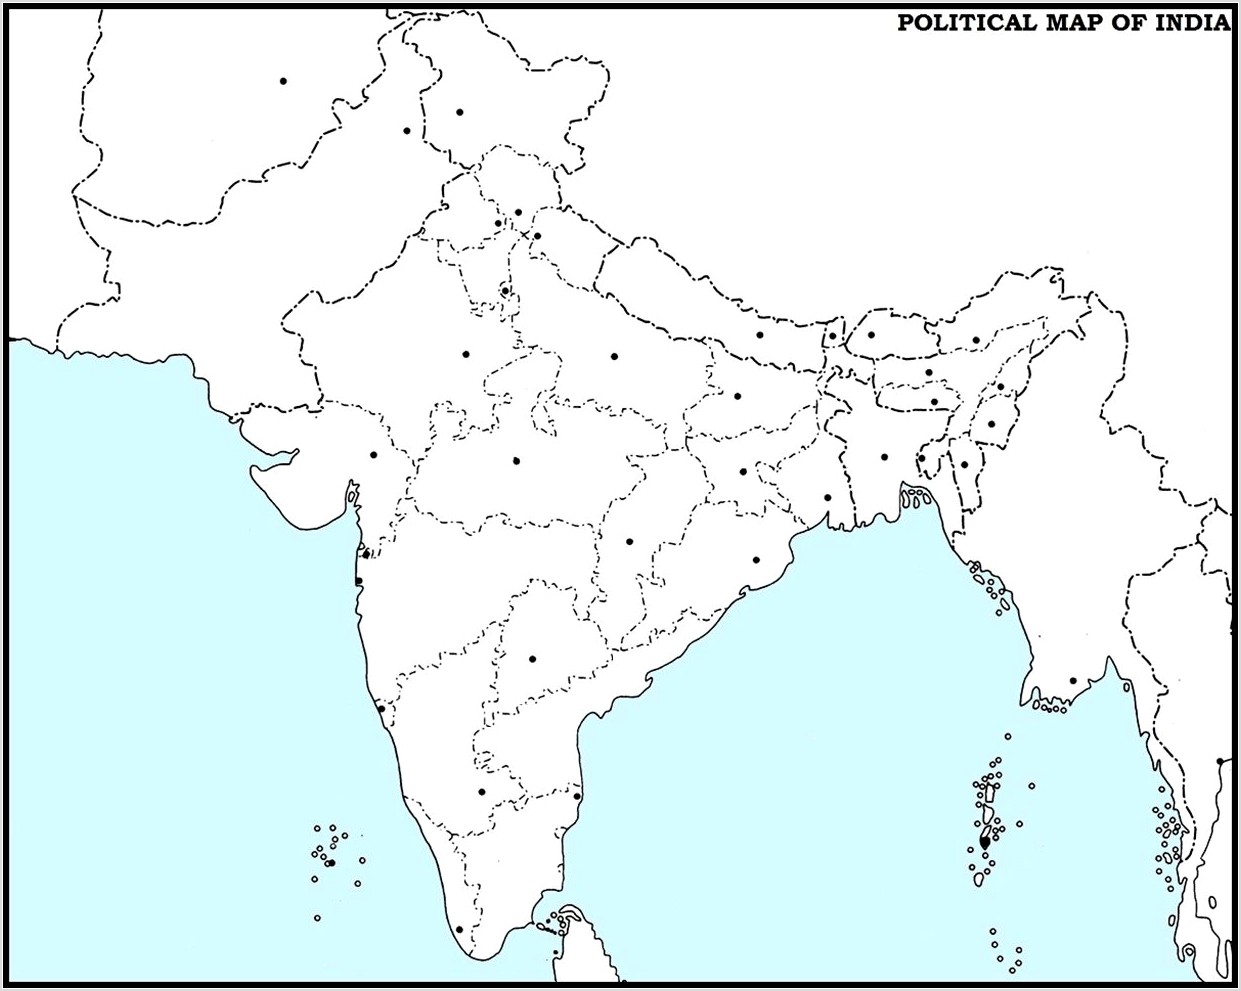 Worksheet On Political Map Of India